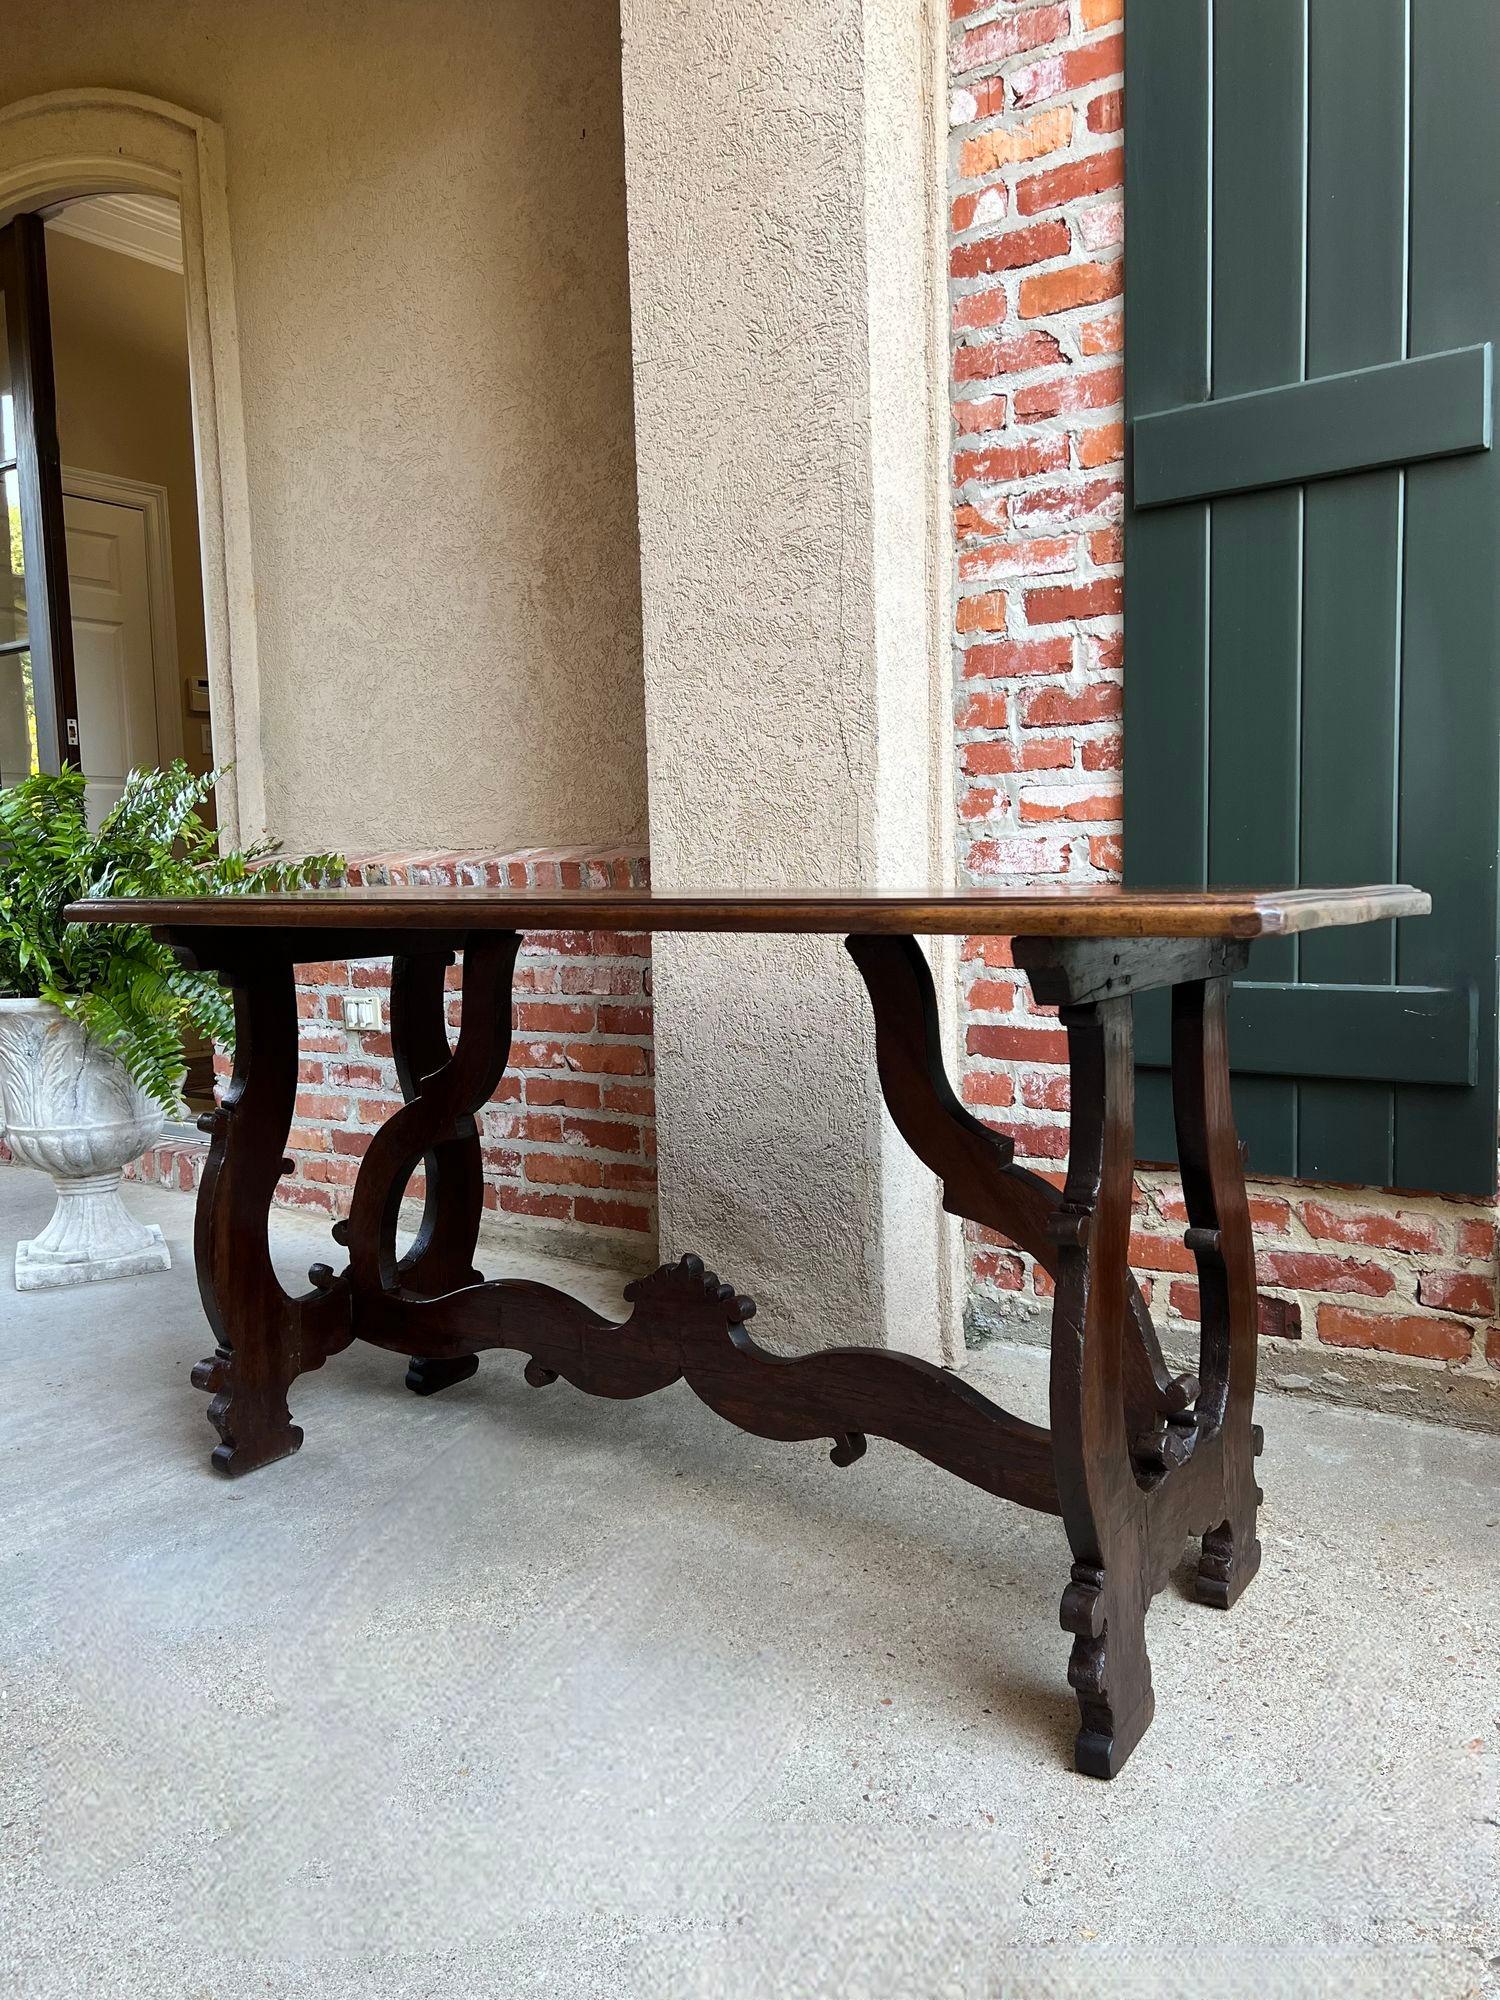 Antique Italian Trestle Dining Table Desk Walnut 6 ft Console Table circa1800.

Direct from Italy, a fabulous antique walnut dining table (or console/conference/library desk). Stunning hand carved construction, with wide shaped legs, trestle, and